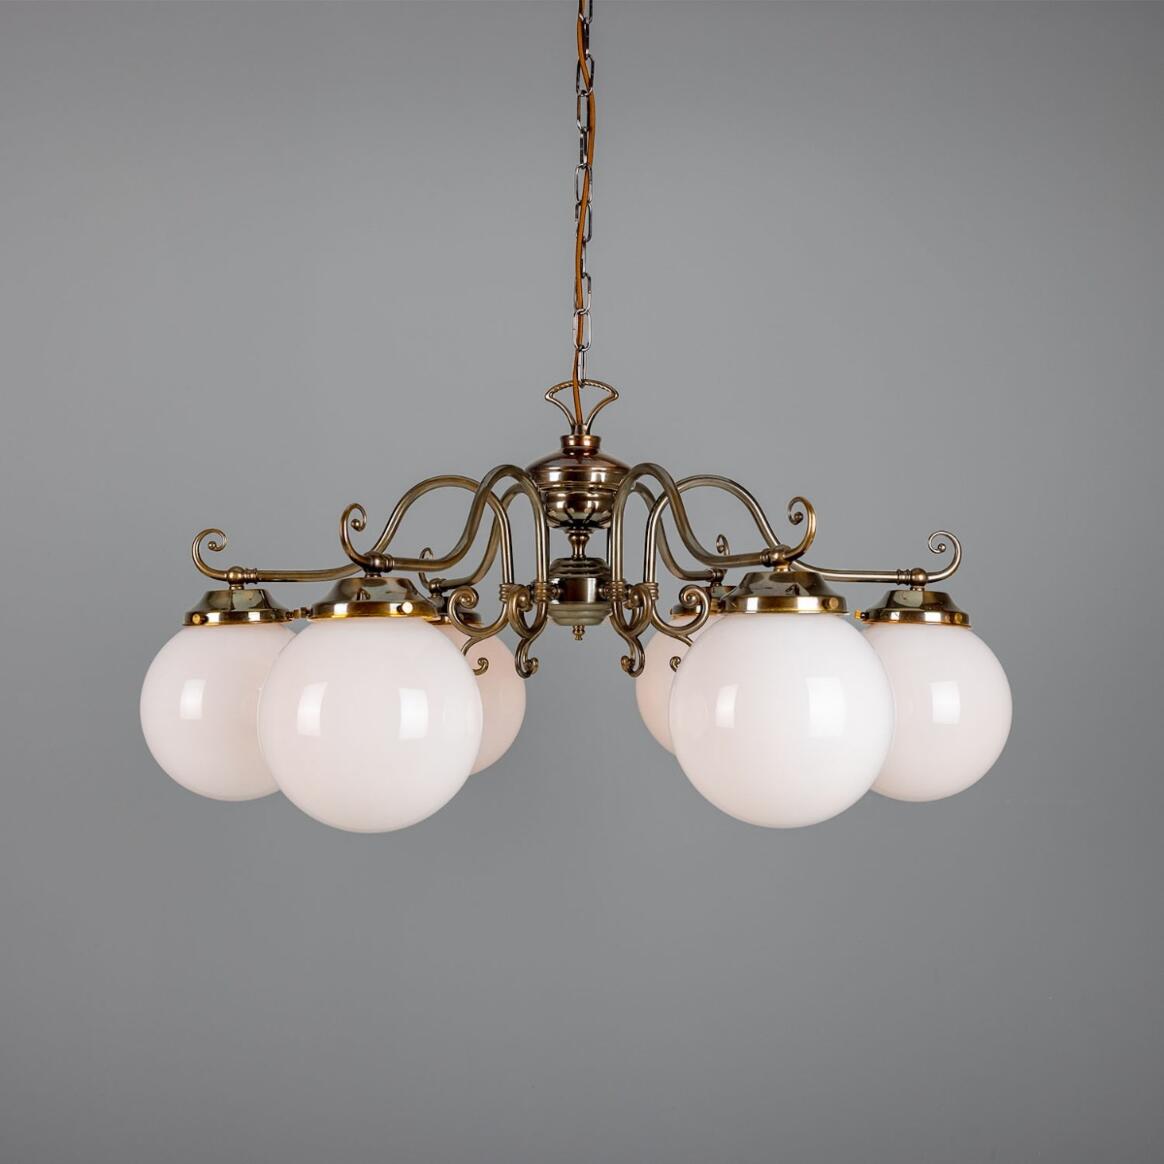 Kilturk Traditional Chandelier with Opal Glass Globes, Six-Light main product image